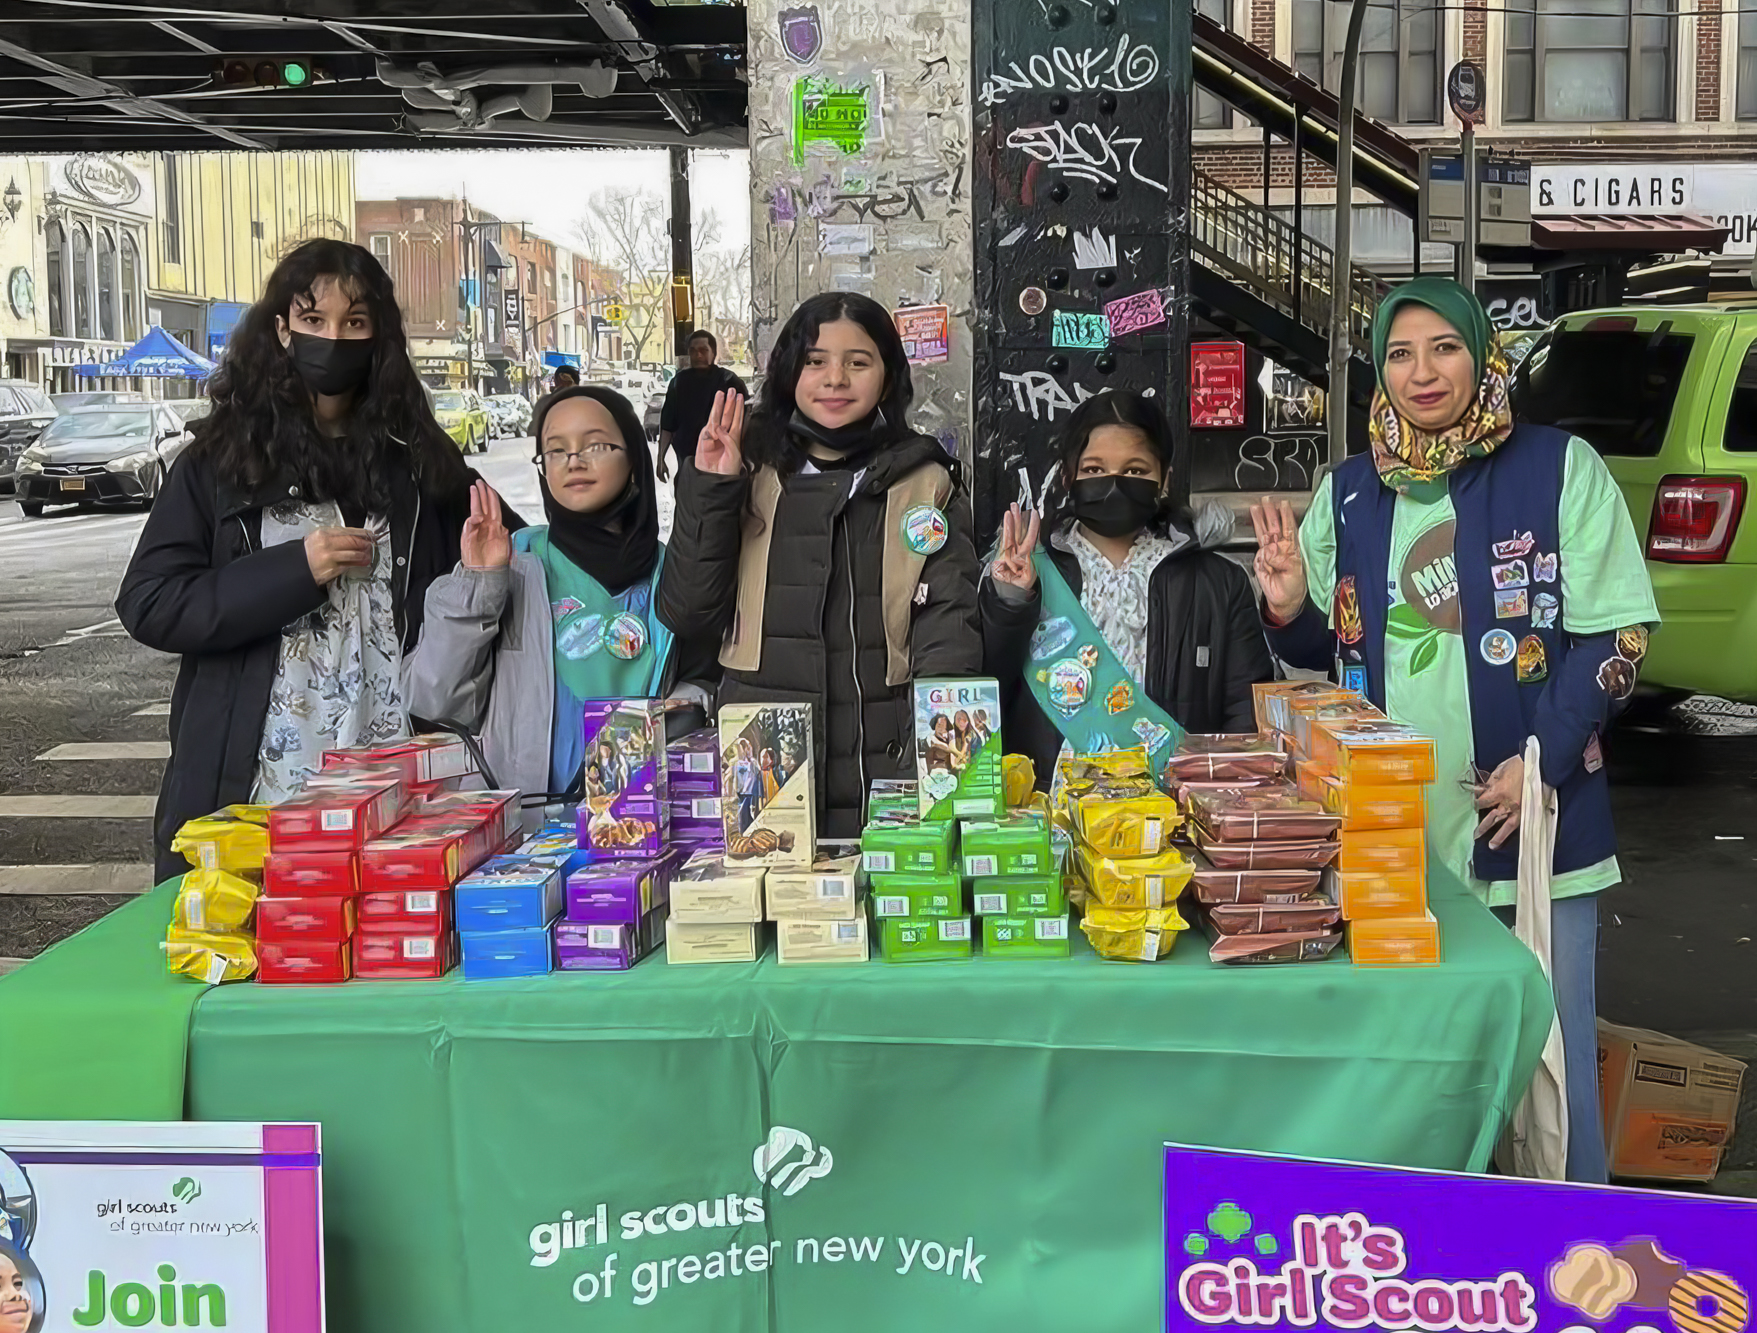 Rayan assists members of the Muslim Girl Scouts of Astoria in annual cookie sales. (Credit: Photo courtesy of The Muslim Girl Scouts of Astoria, Instagram).